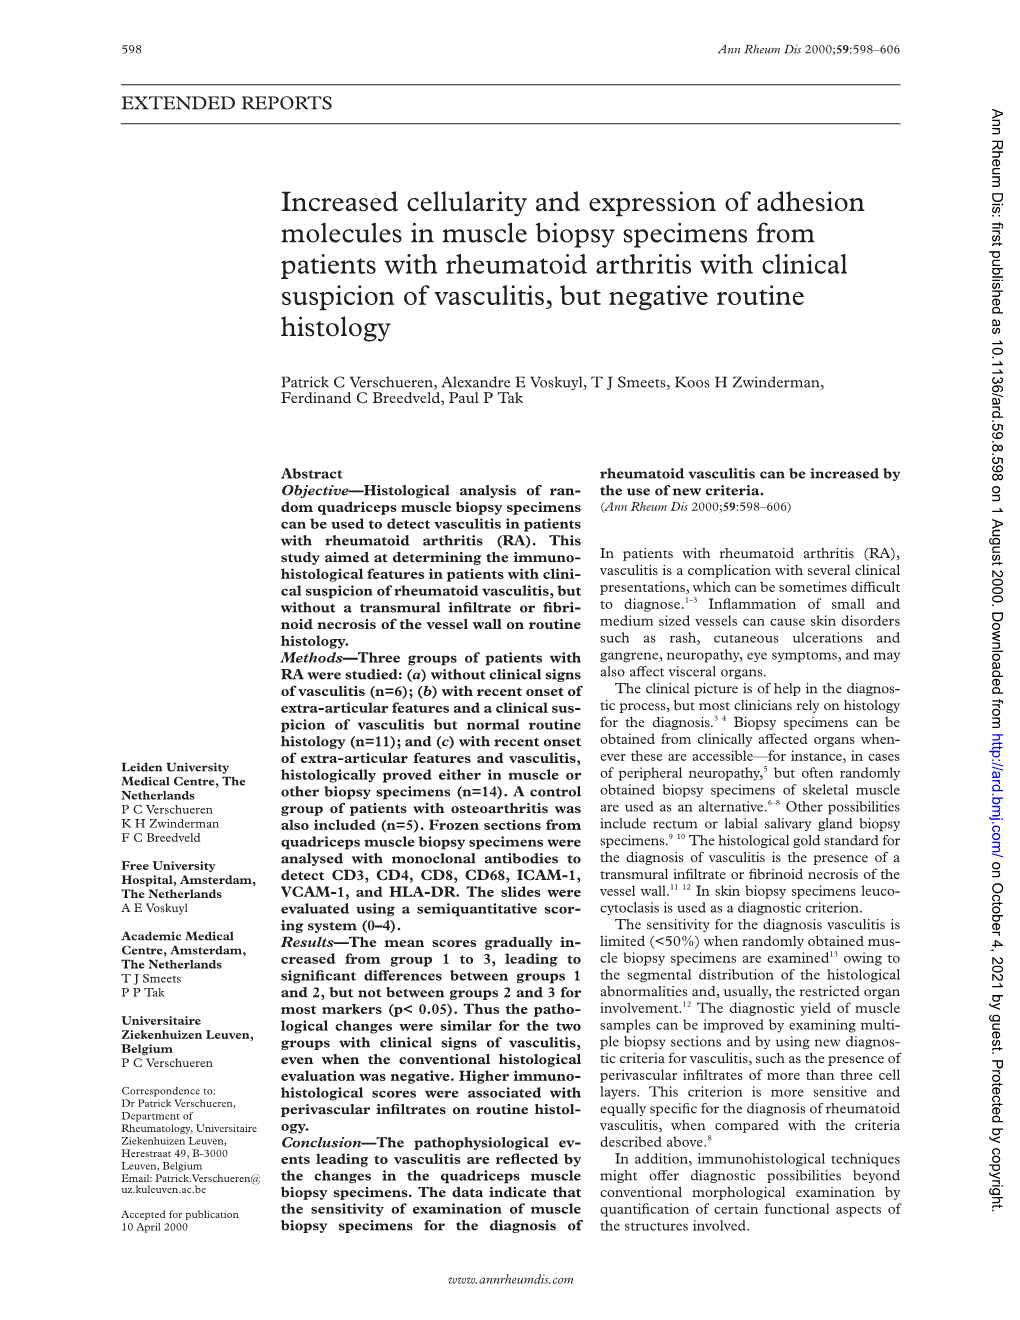 Increased Cellularity and Expression of Adhesion Molecules in Muscle